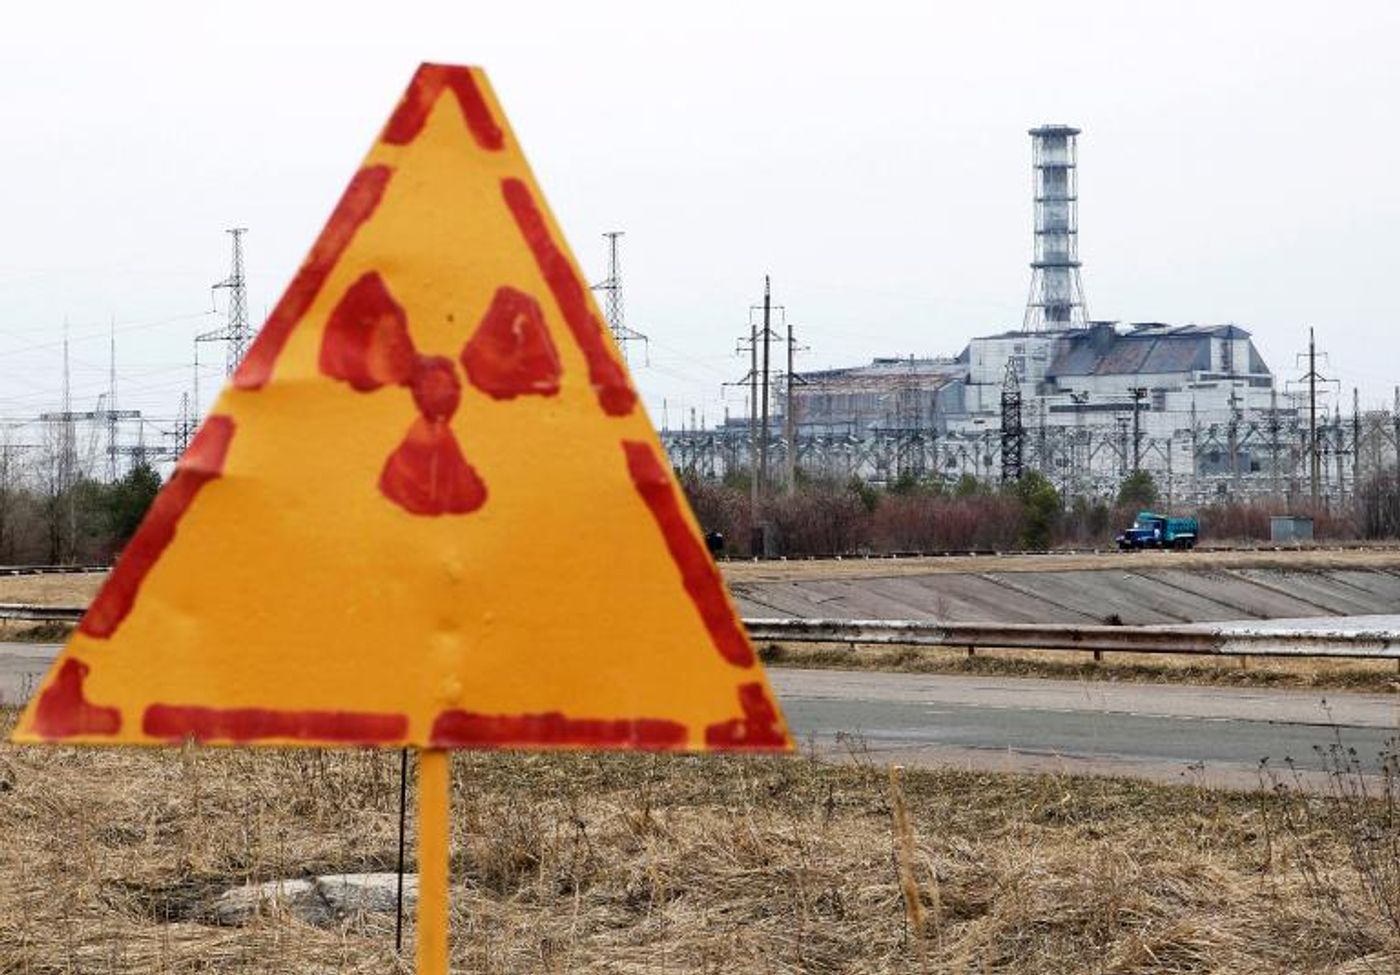 Chernobyl is a site of one of the worst man-made disasters to affect the environment in human history.